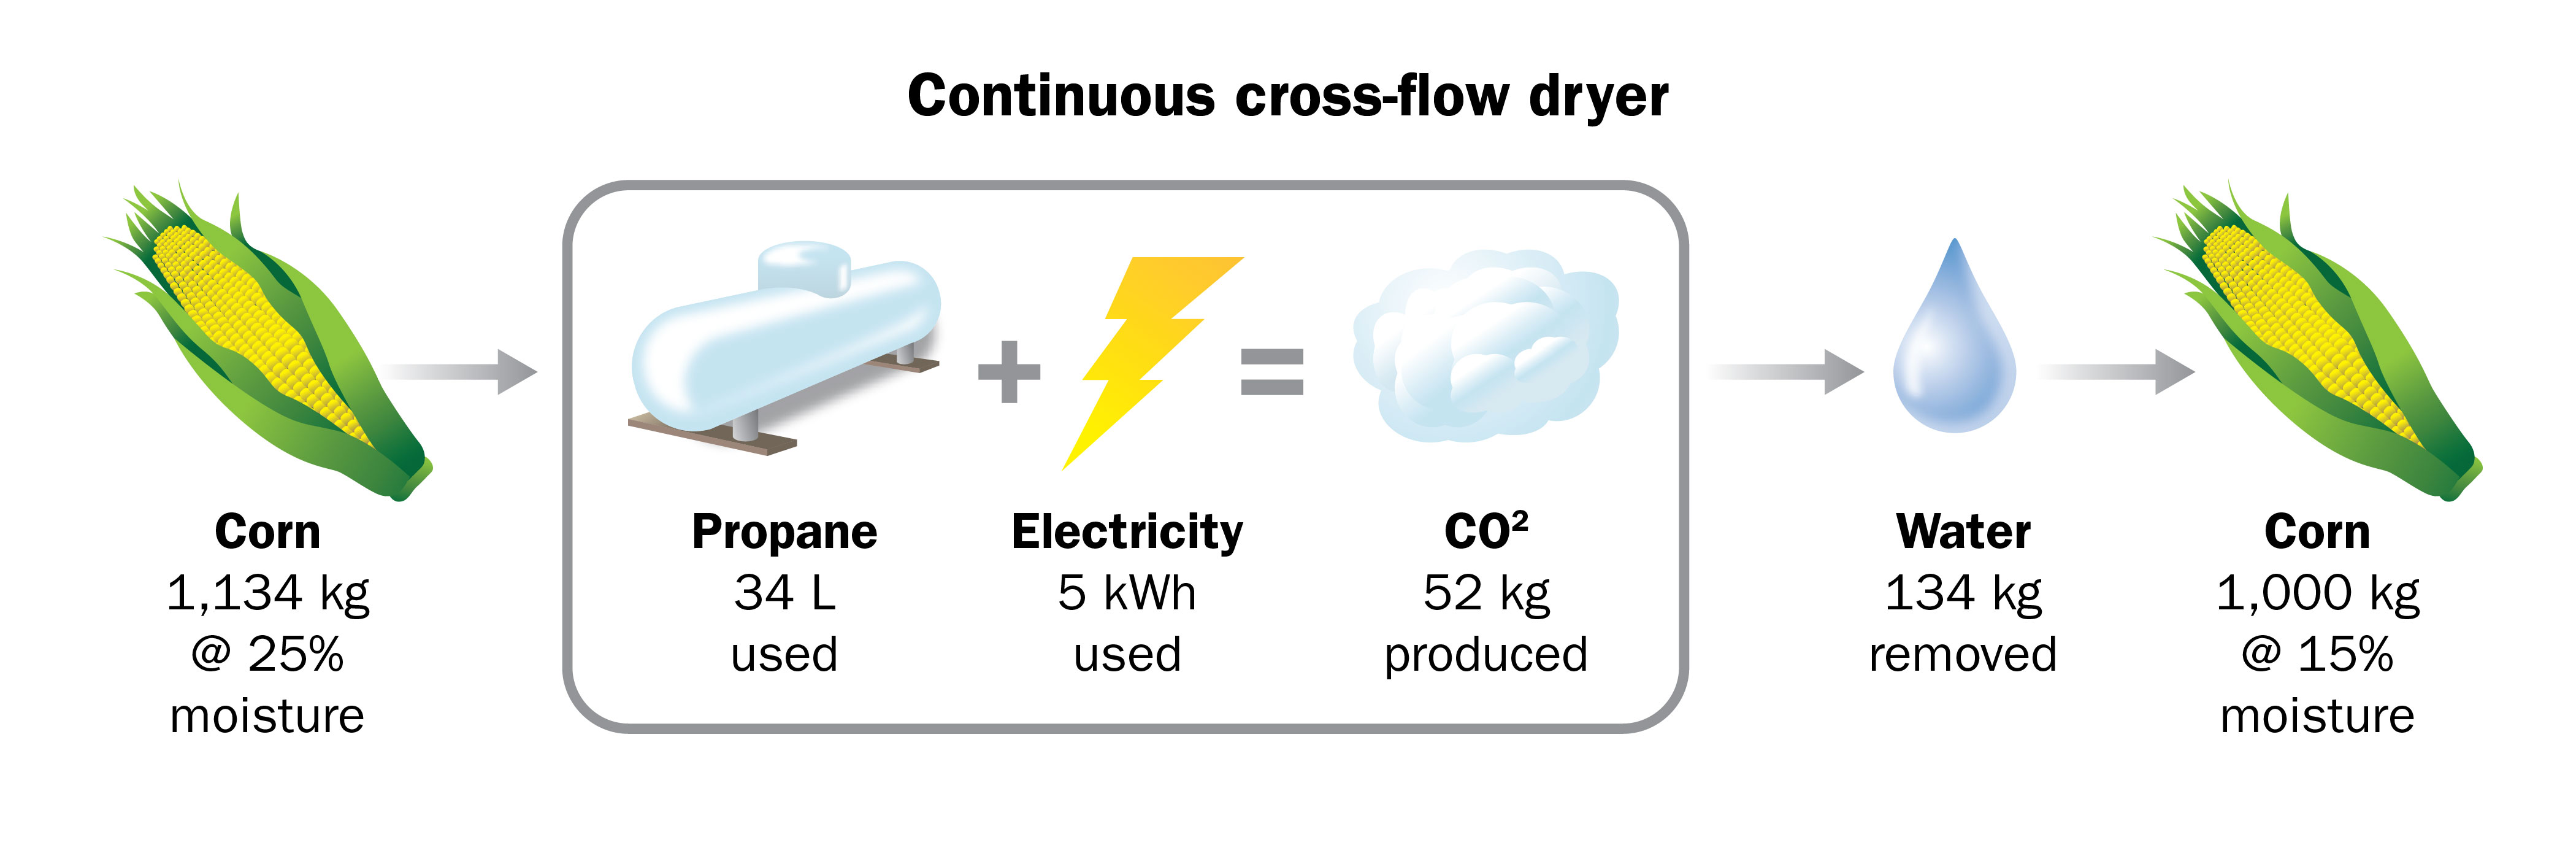 Energy used and carbon dioxide emitted by drying one tonne of corn from 25% moisture to 15% moisture in a cross-flow grain dryer using propane fuel